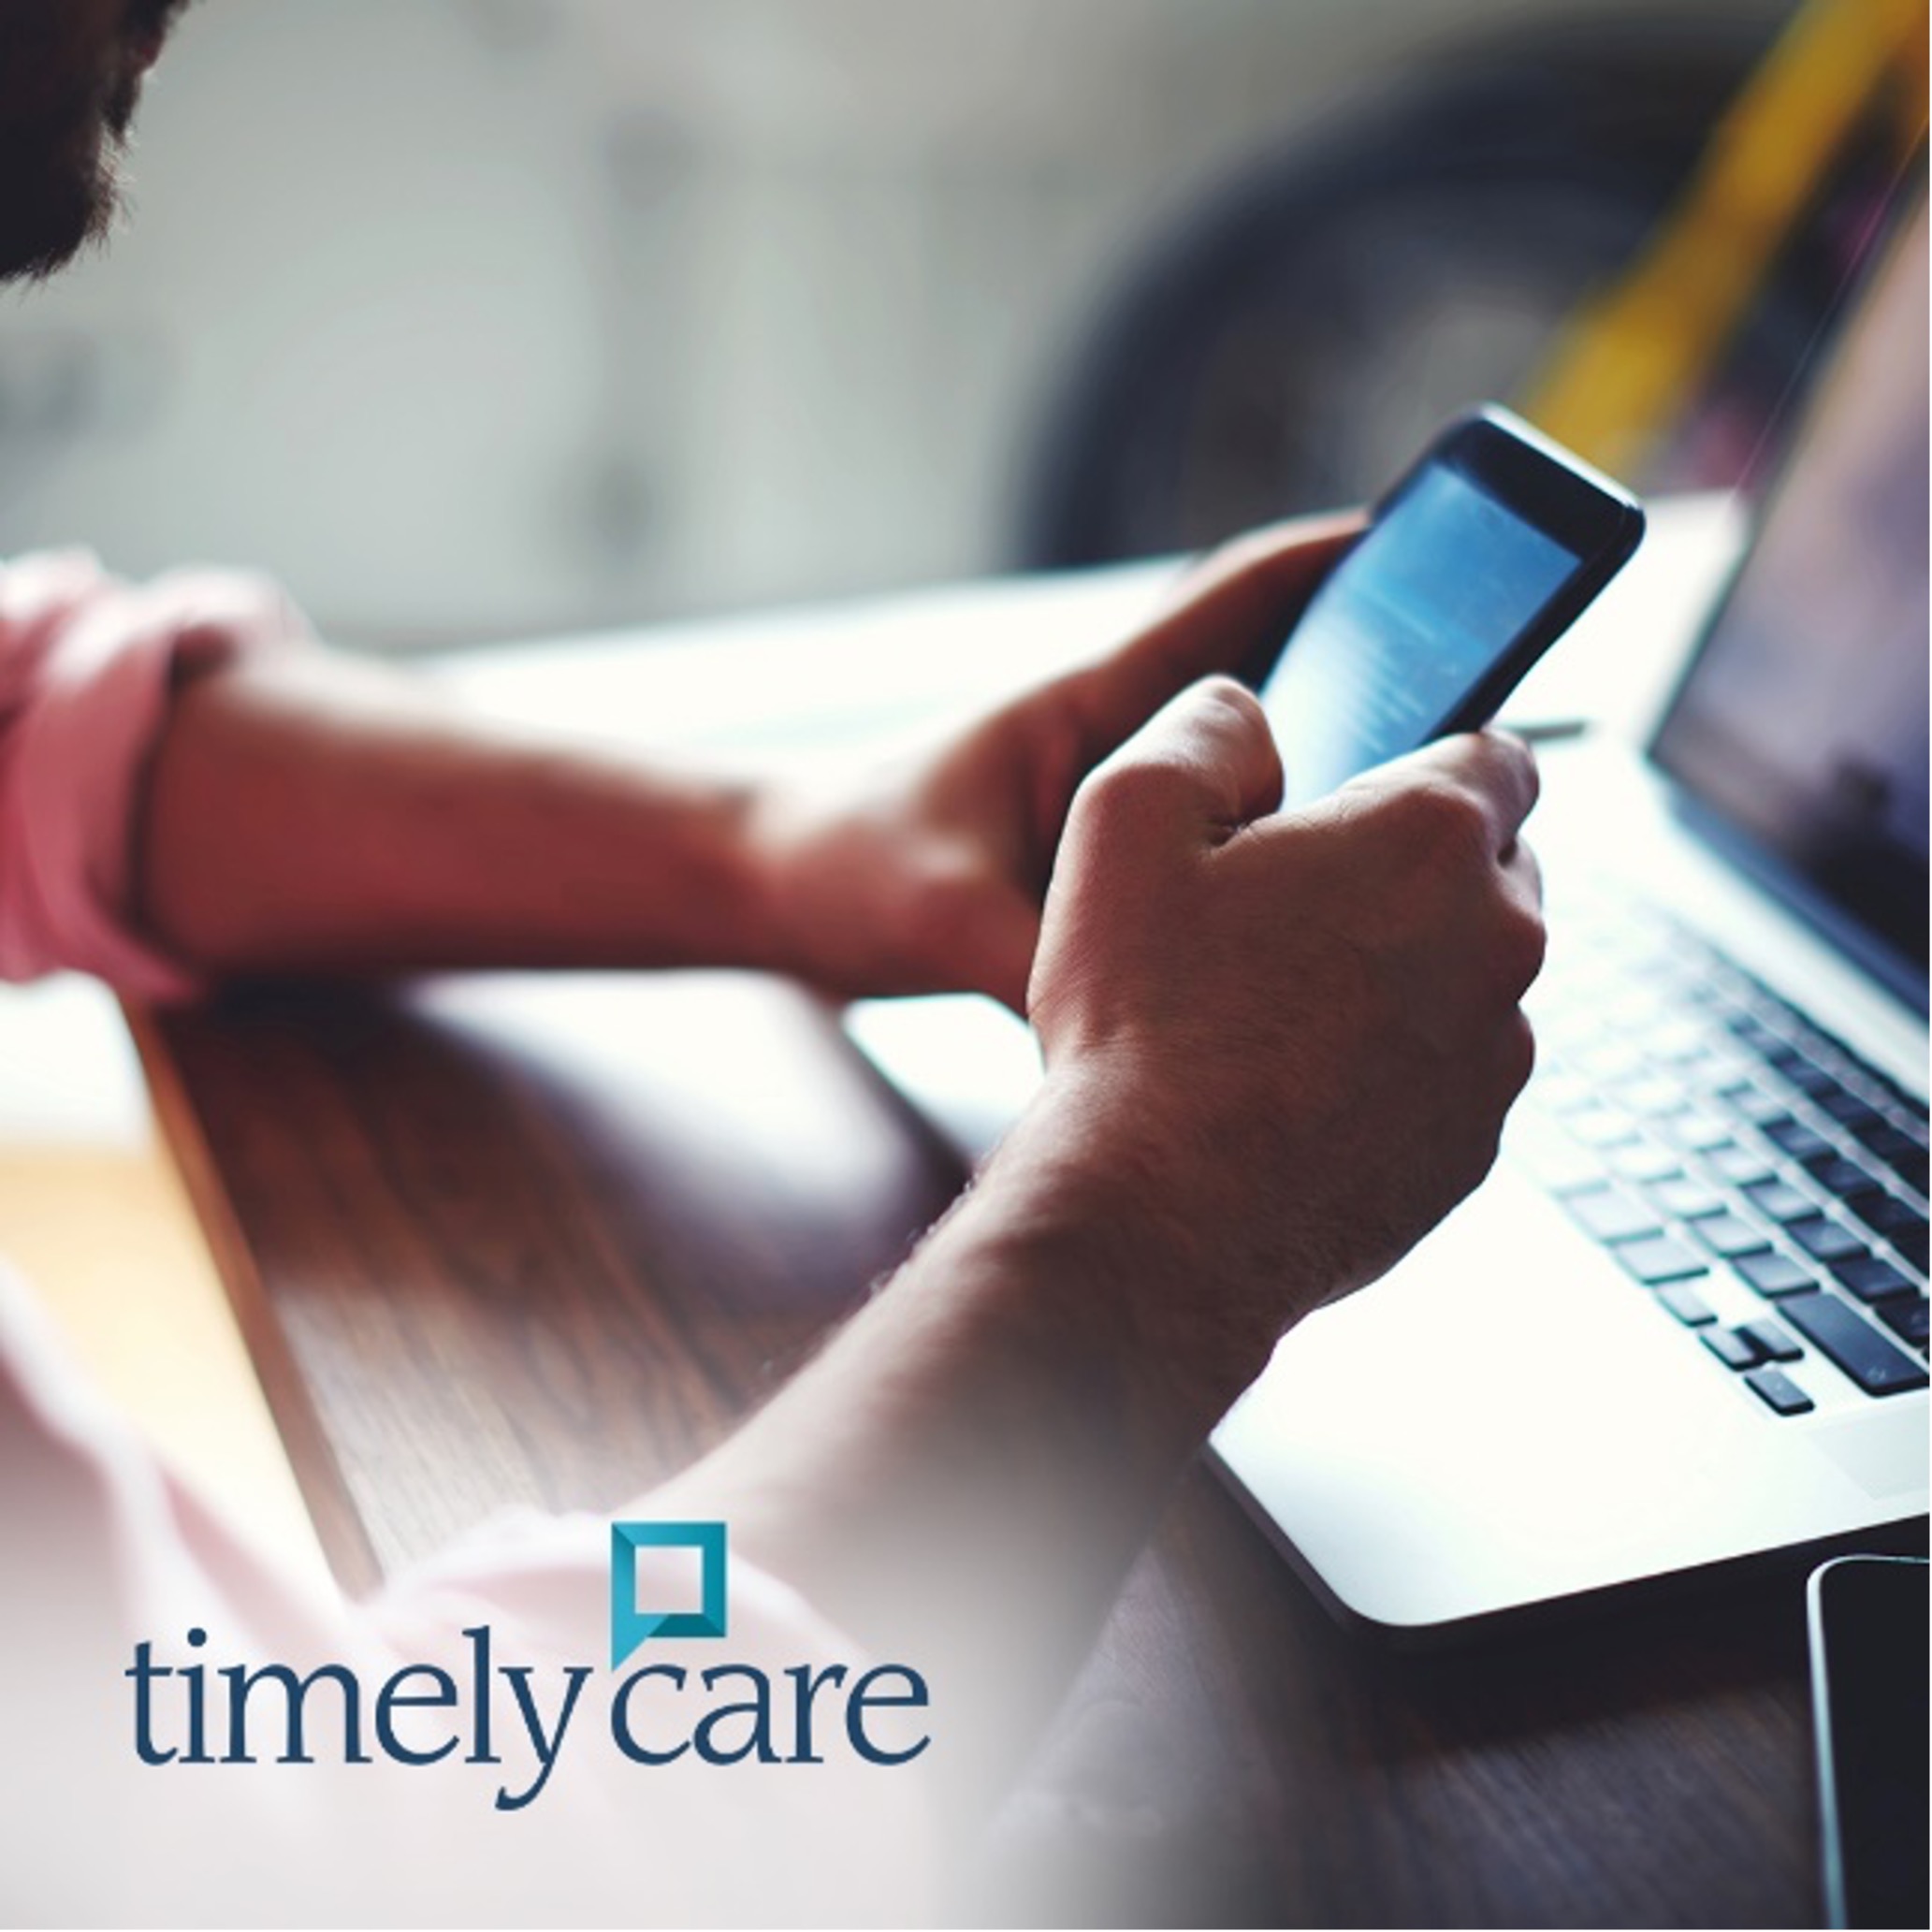 Photo of person holding phone with laptop in background. The words "timelycare" are written on top of photo.